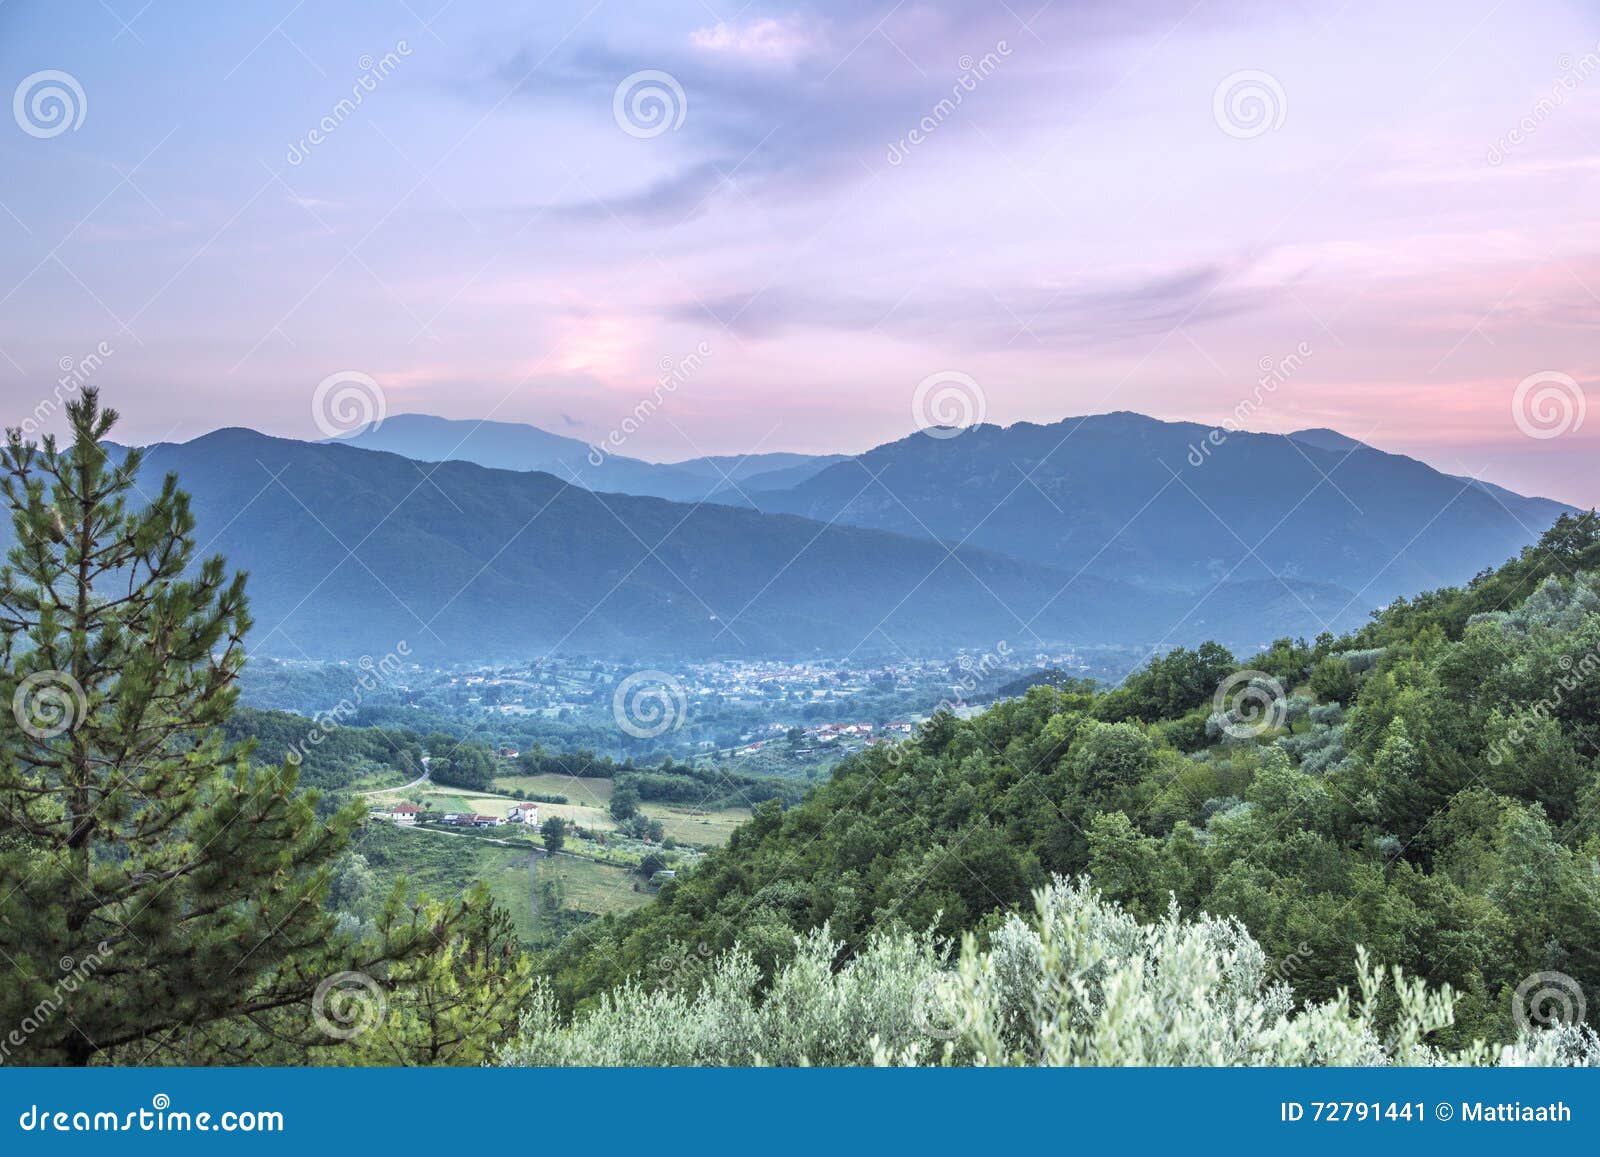 pink sunset on the apennines italy